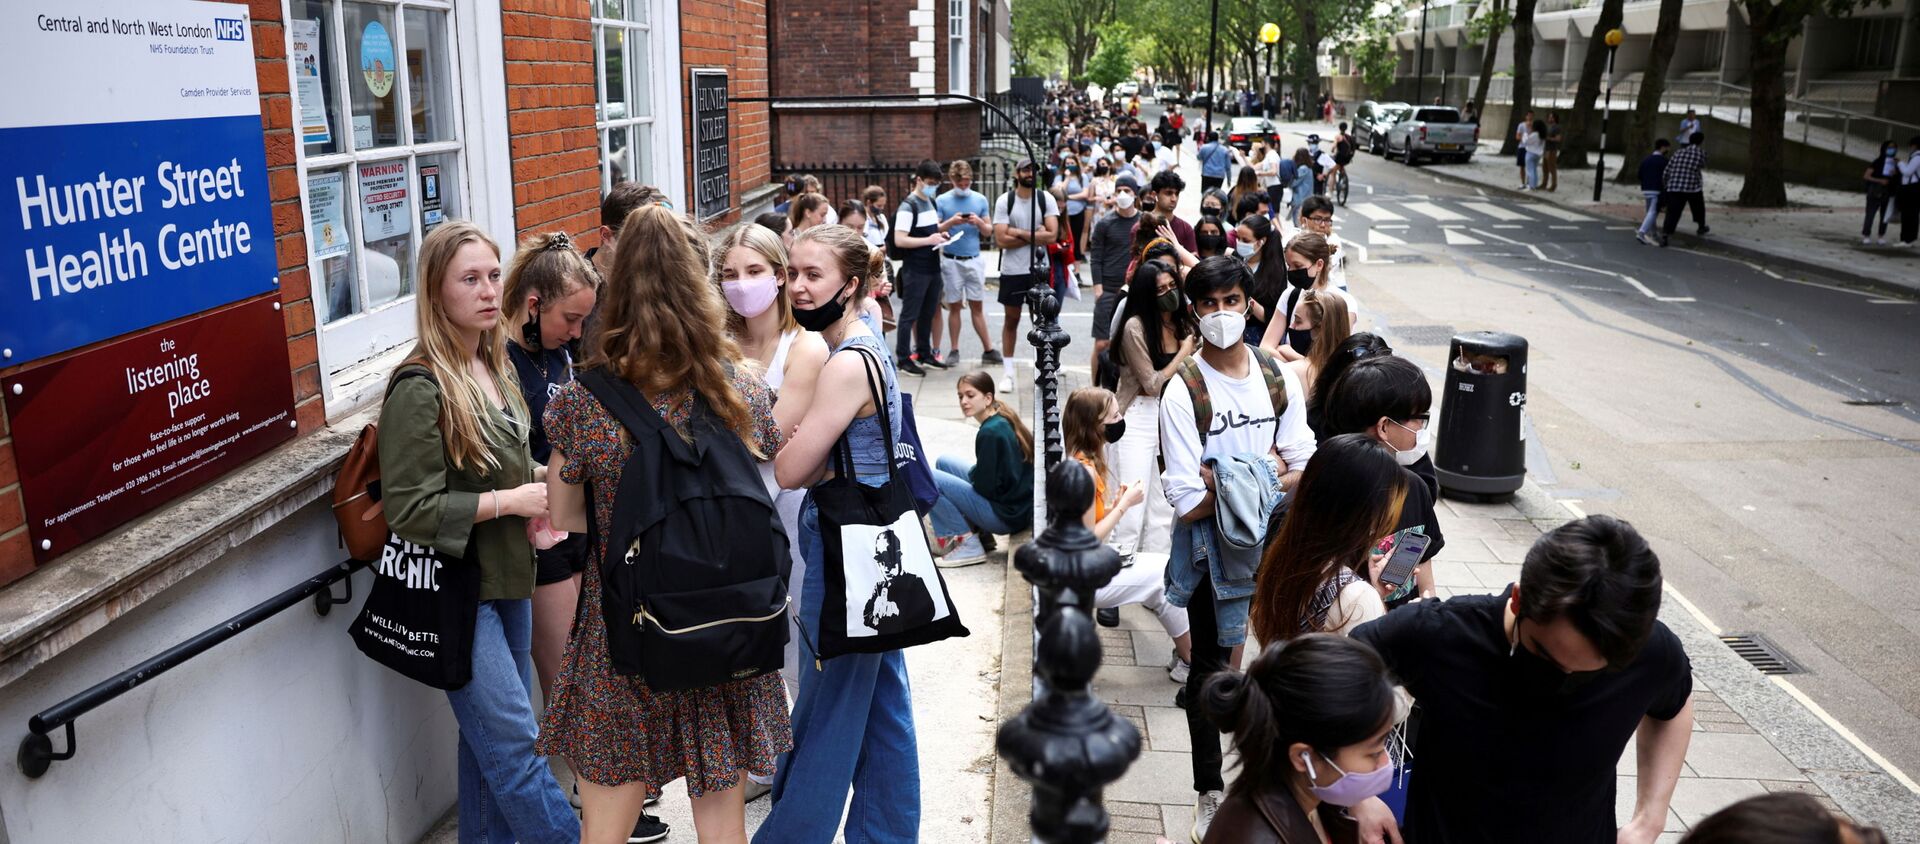 People queue outside a vaccination centre for young people and students at the Hunter Street Health Centre, amid the coronavirus disease (COVID-19) outbreak, in London, Britain, June 5, 2021 - Sputnik International, 1920, 19.07.2021